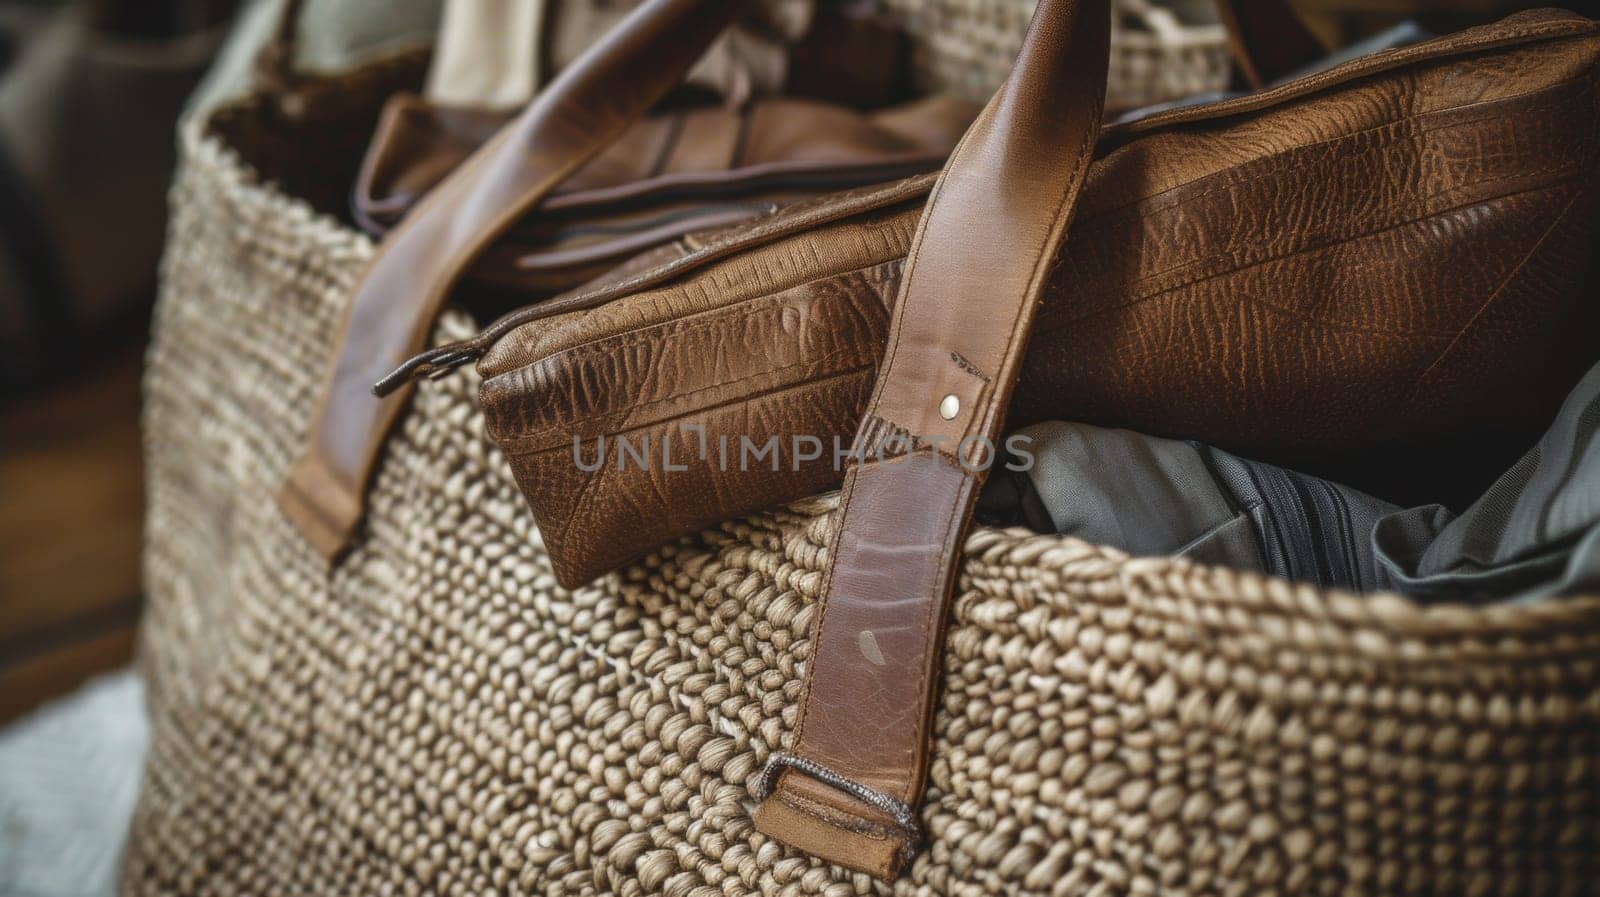 A large woven basket with a brown leather bag inside, AI by starush